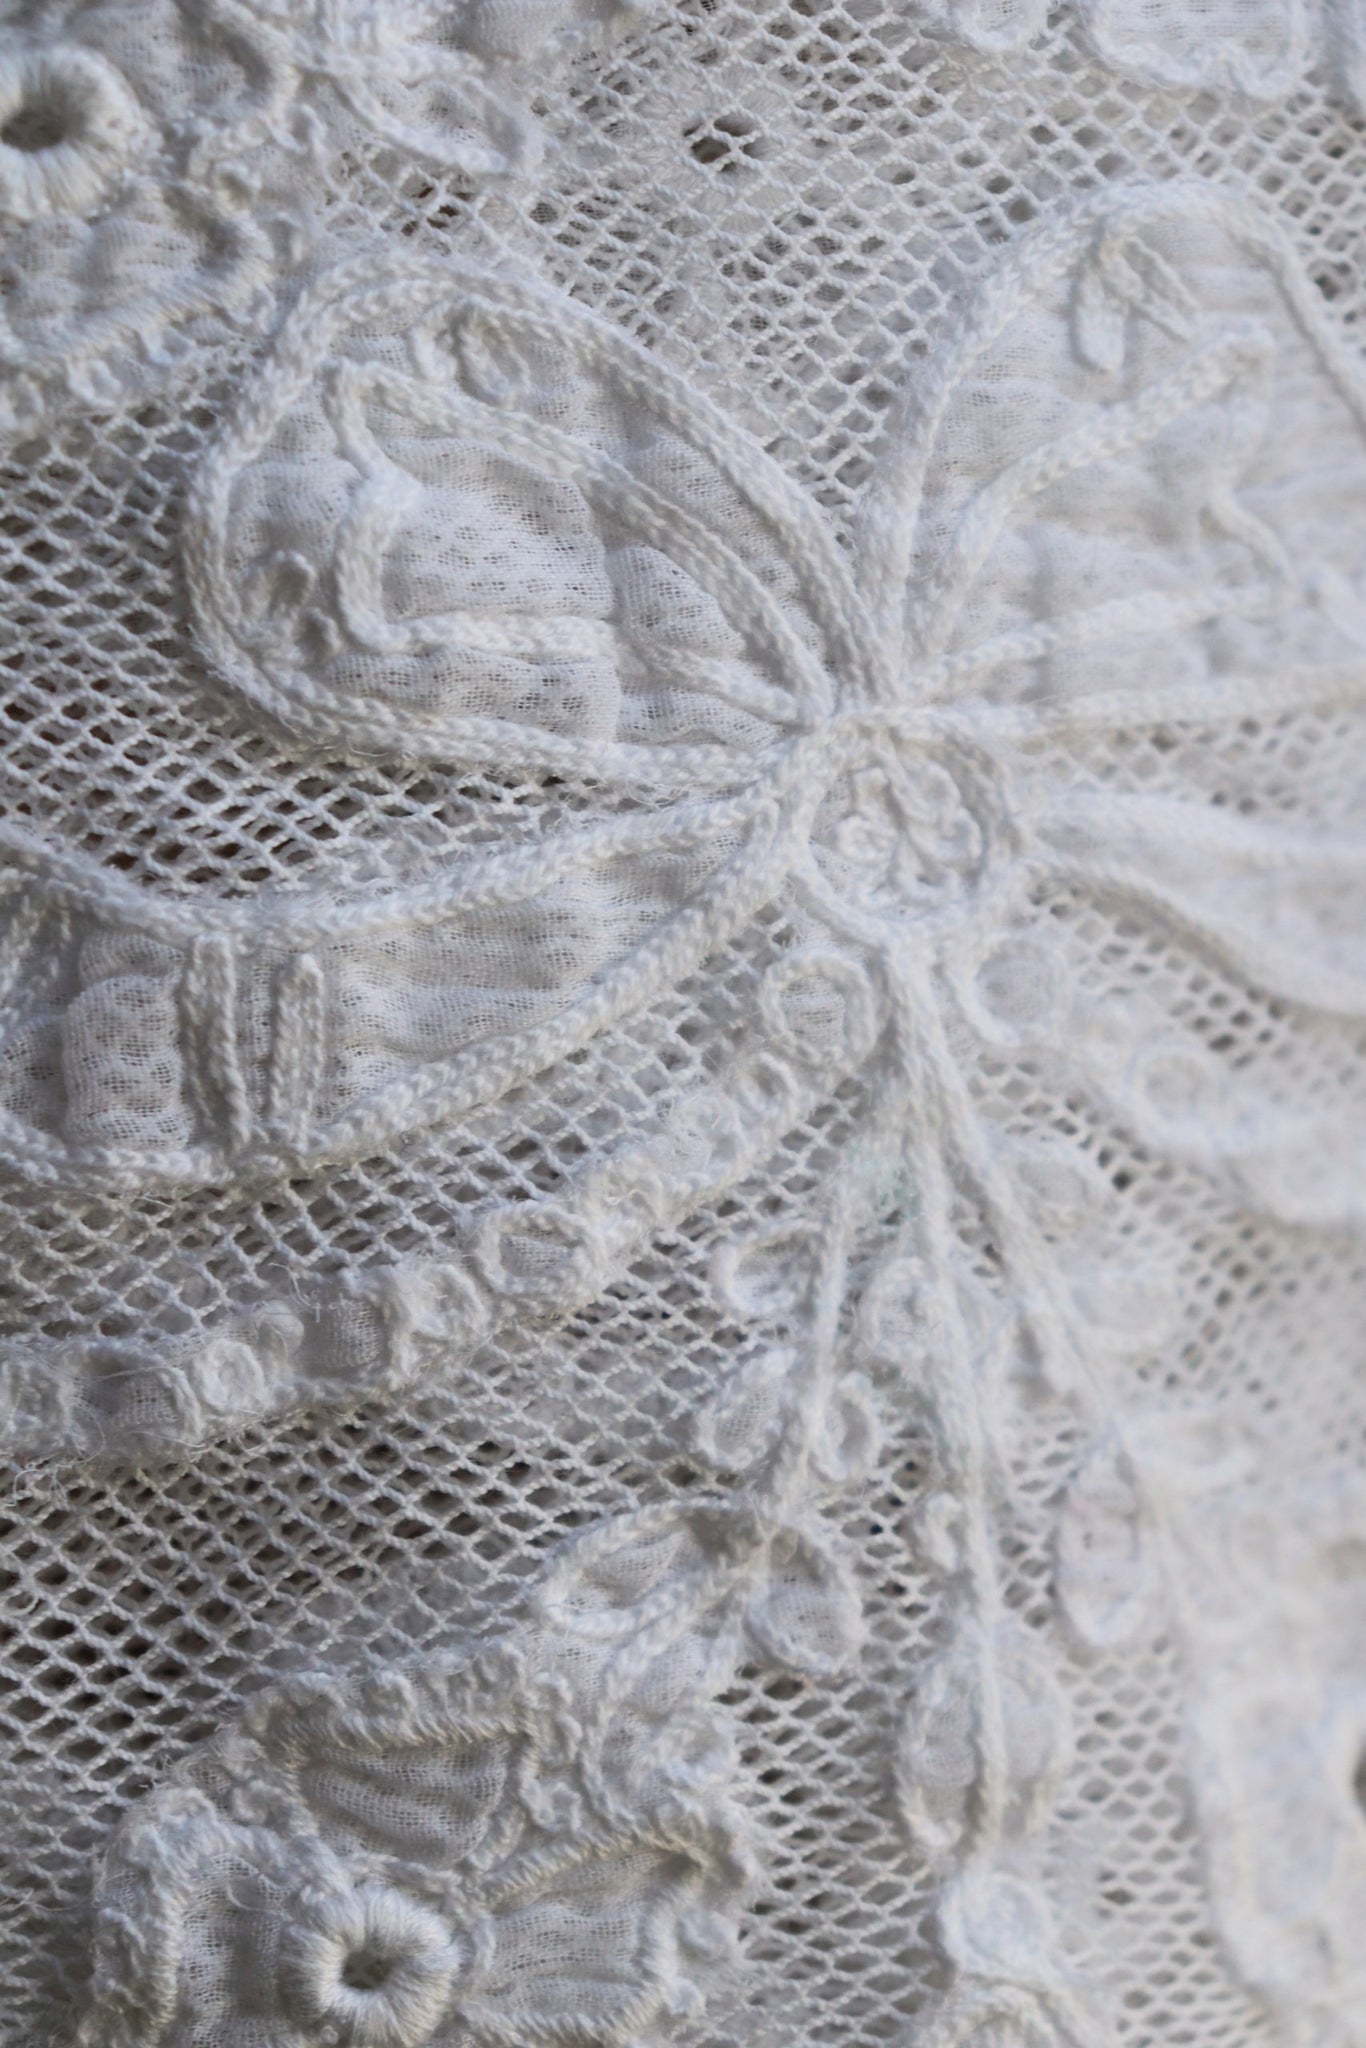 1900s French Antique Lace Skirt Hem